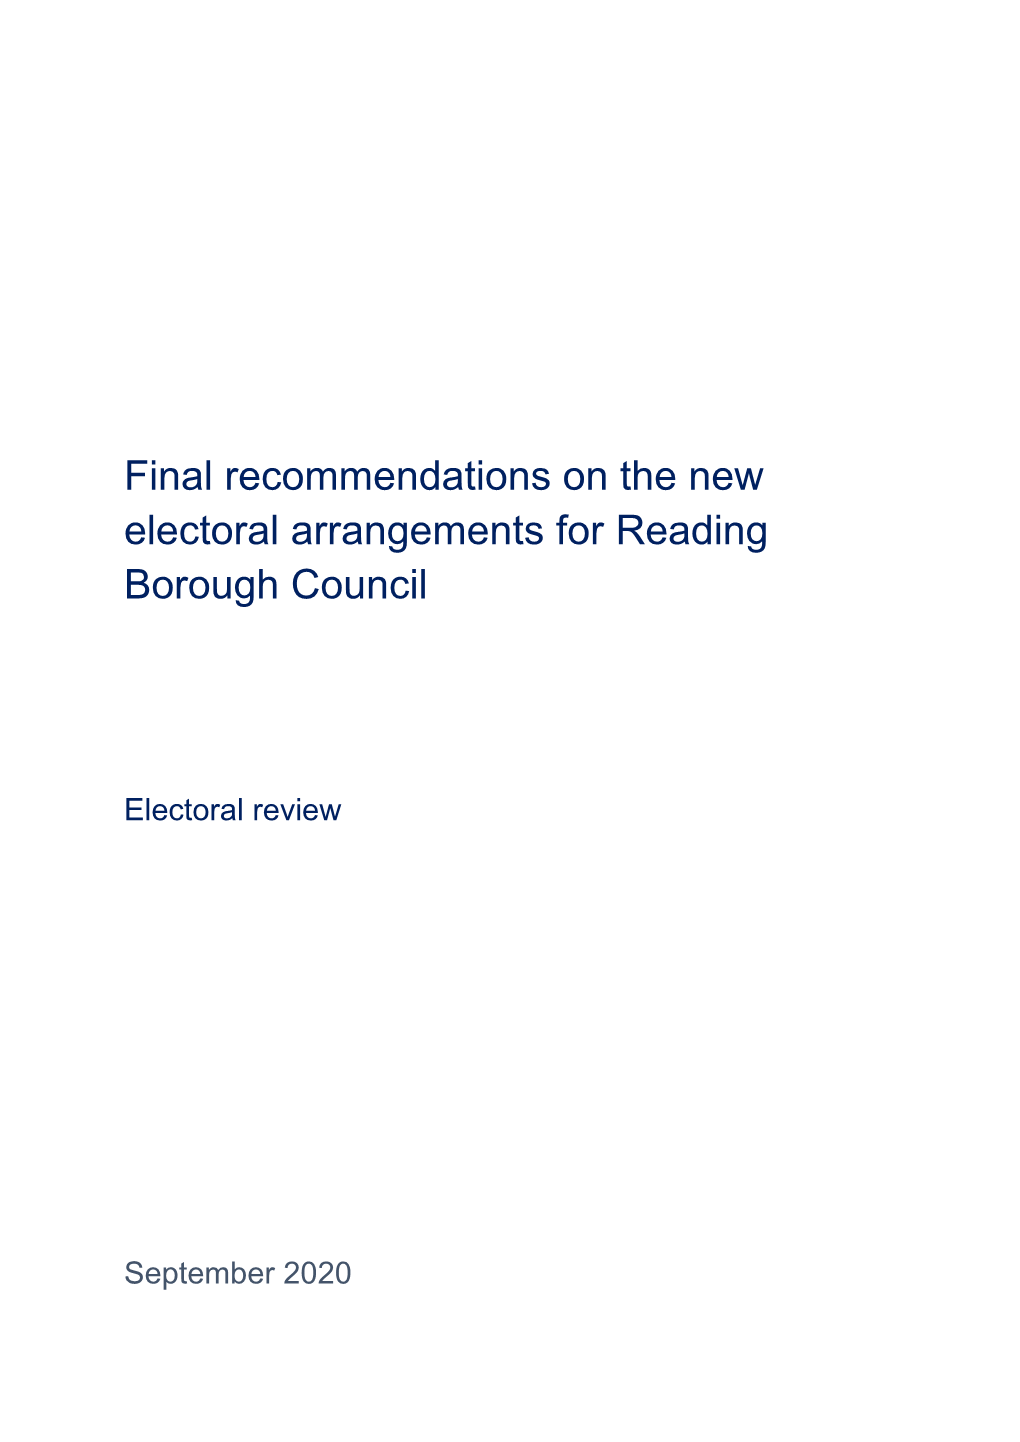 Final Recommendations on the New Electoral Arrangements for Reading Borough Council